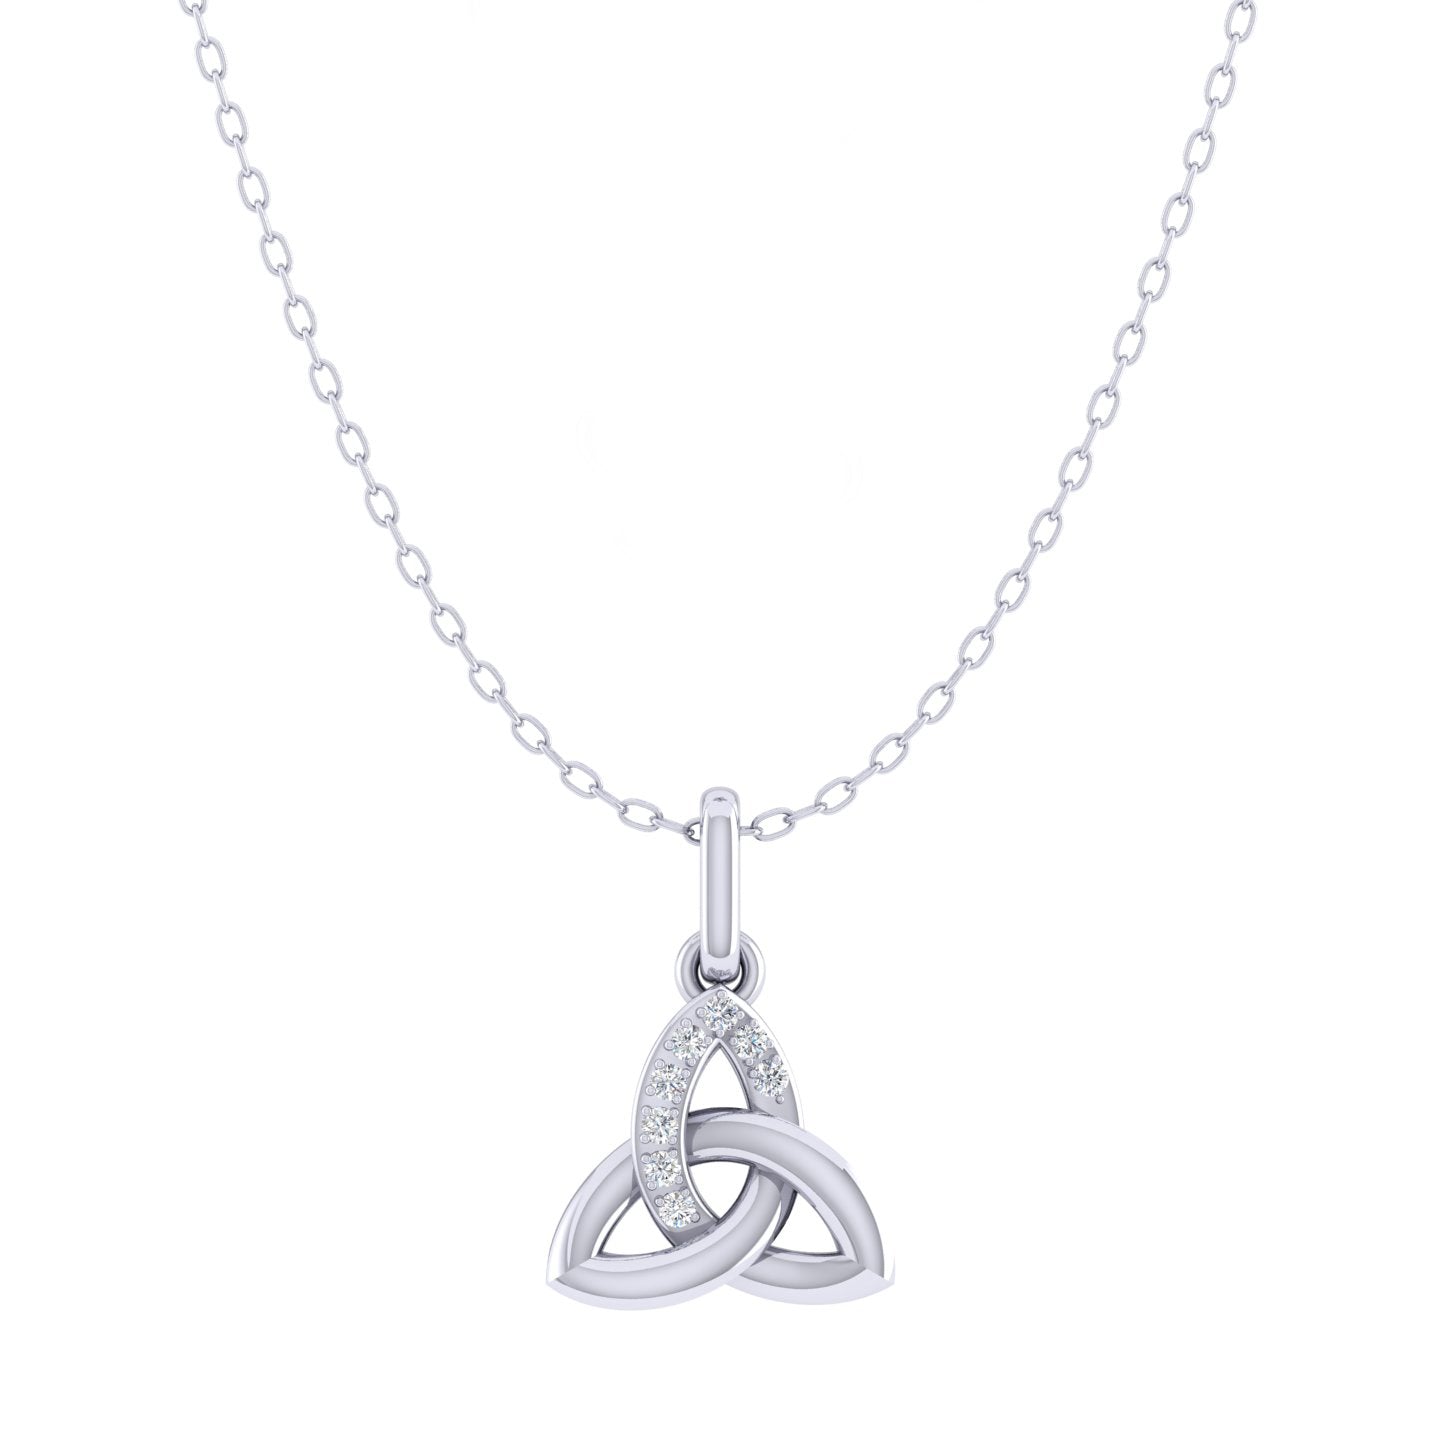 Celtic Trinity Knot 1/40 Cttw Natural Diamond Pendant Necklace set in 925 Sterling Silver